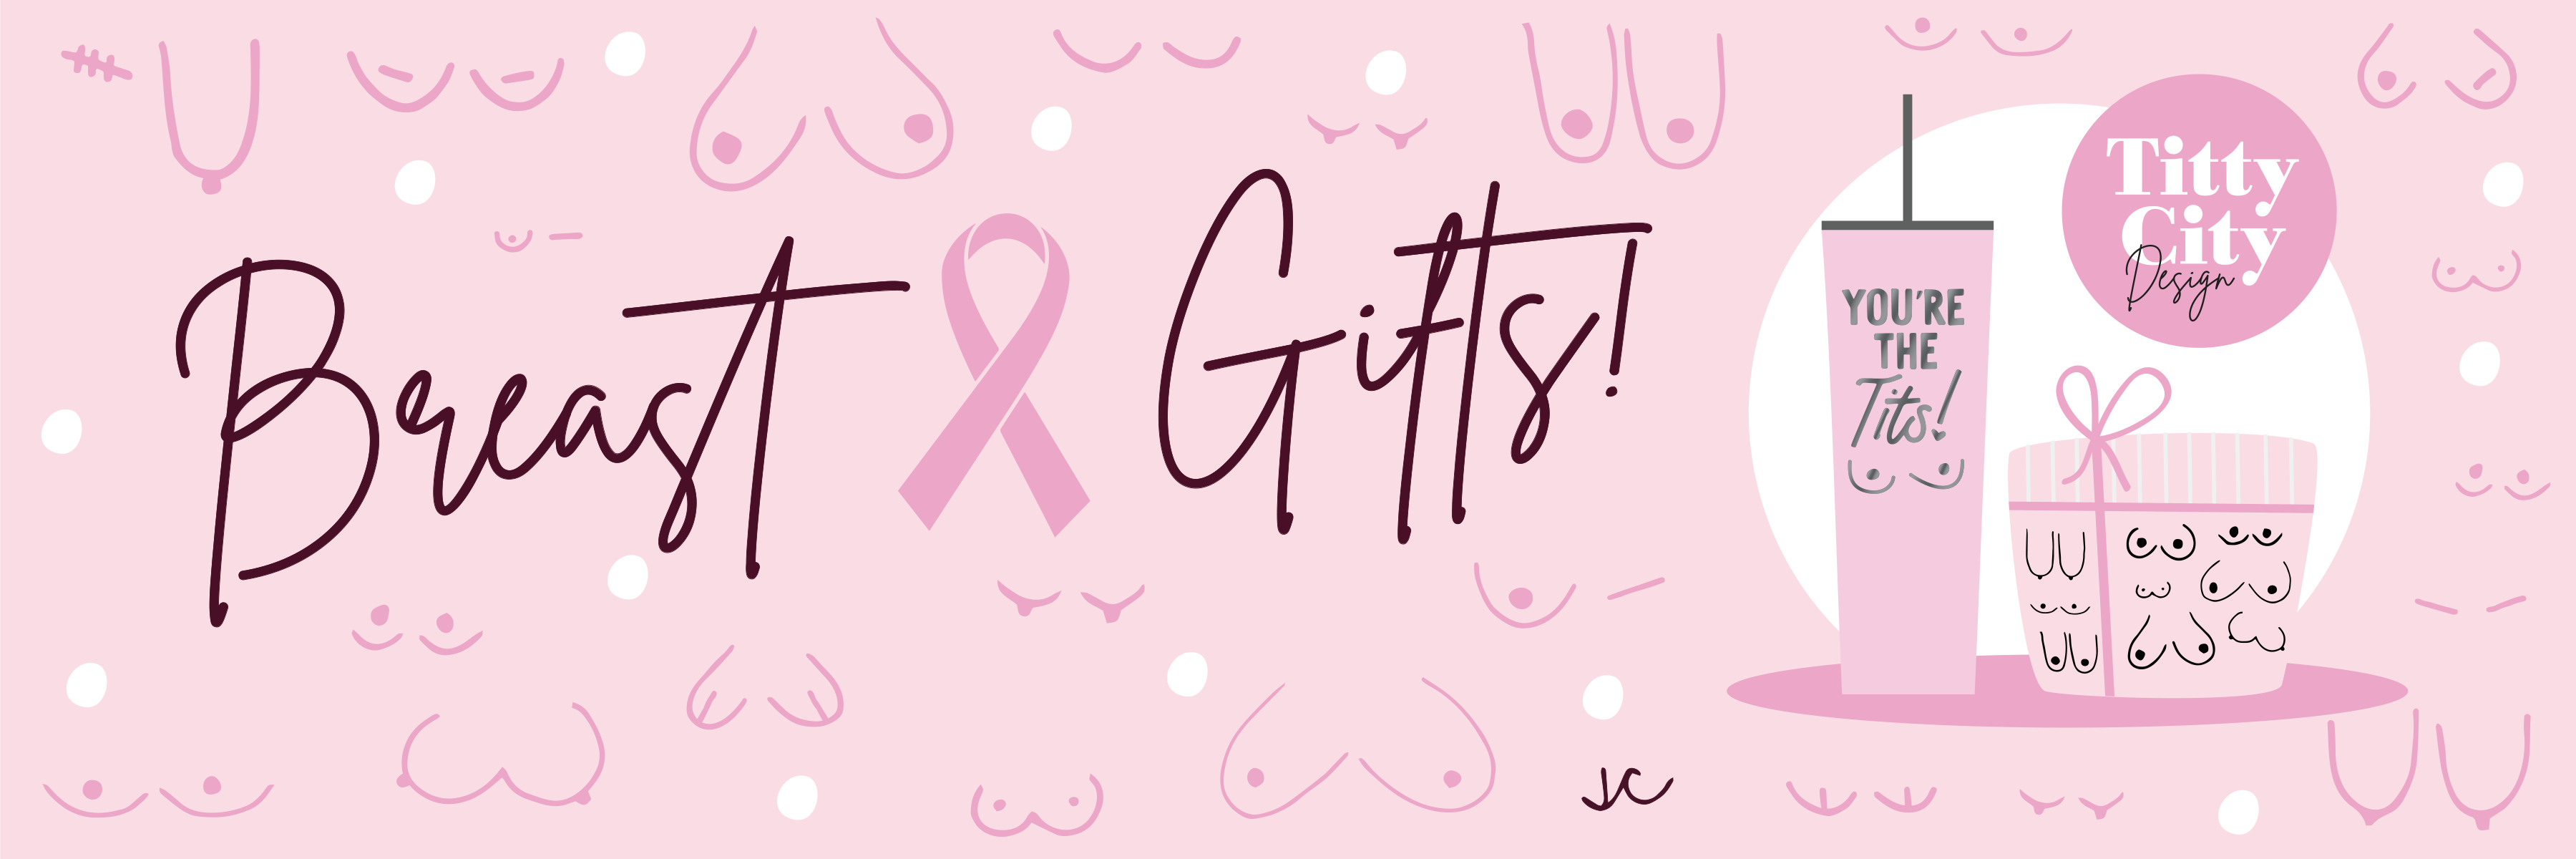 Gifts for Breast Cancer Patients - Titty City Design - Breast Gifts - full